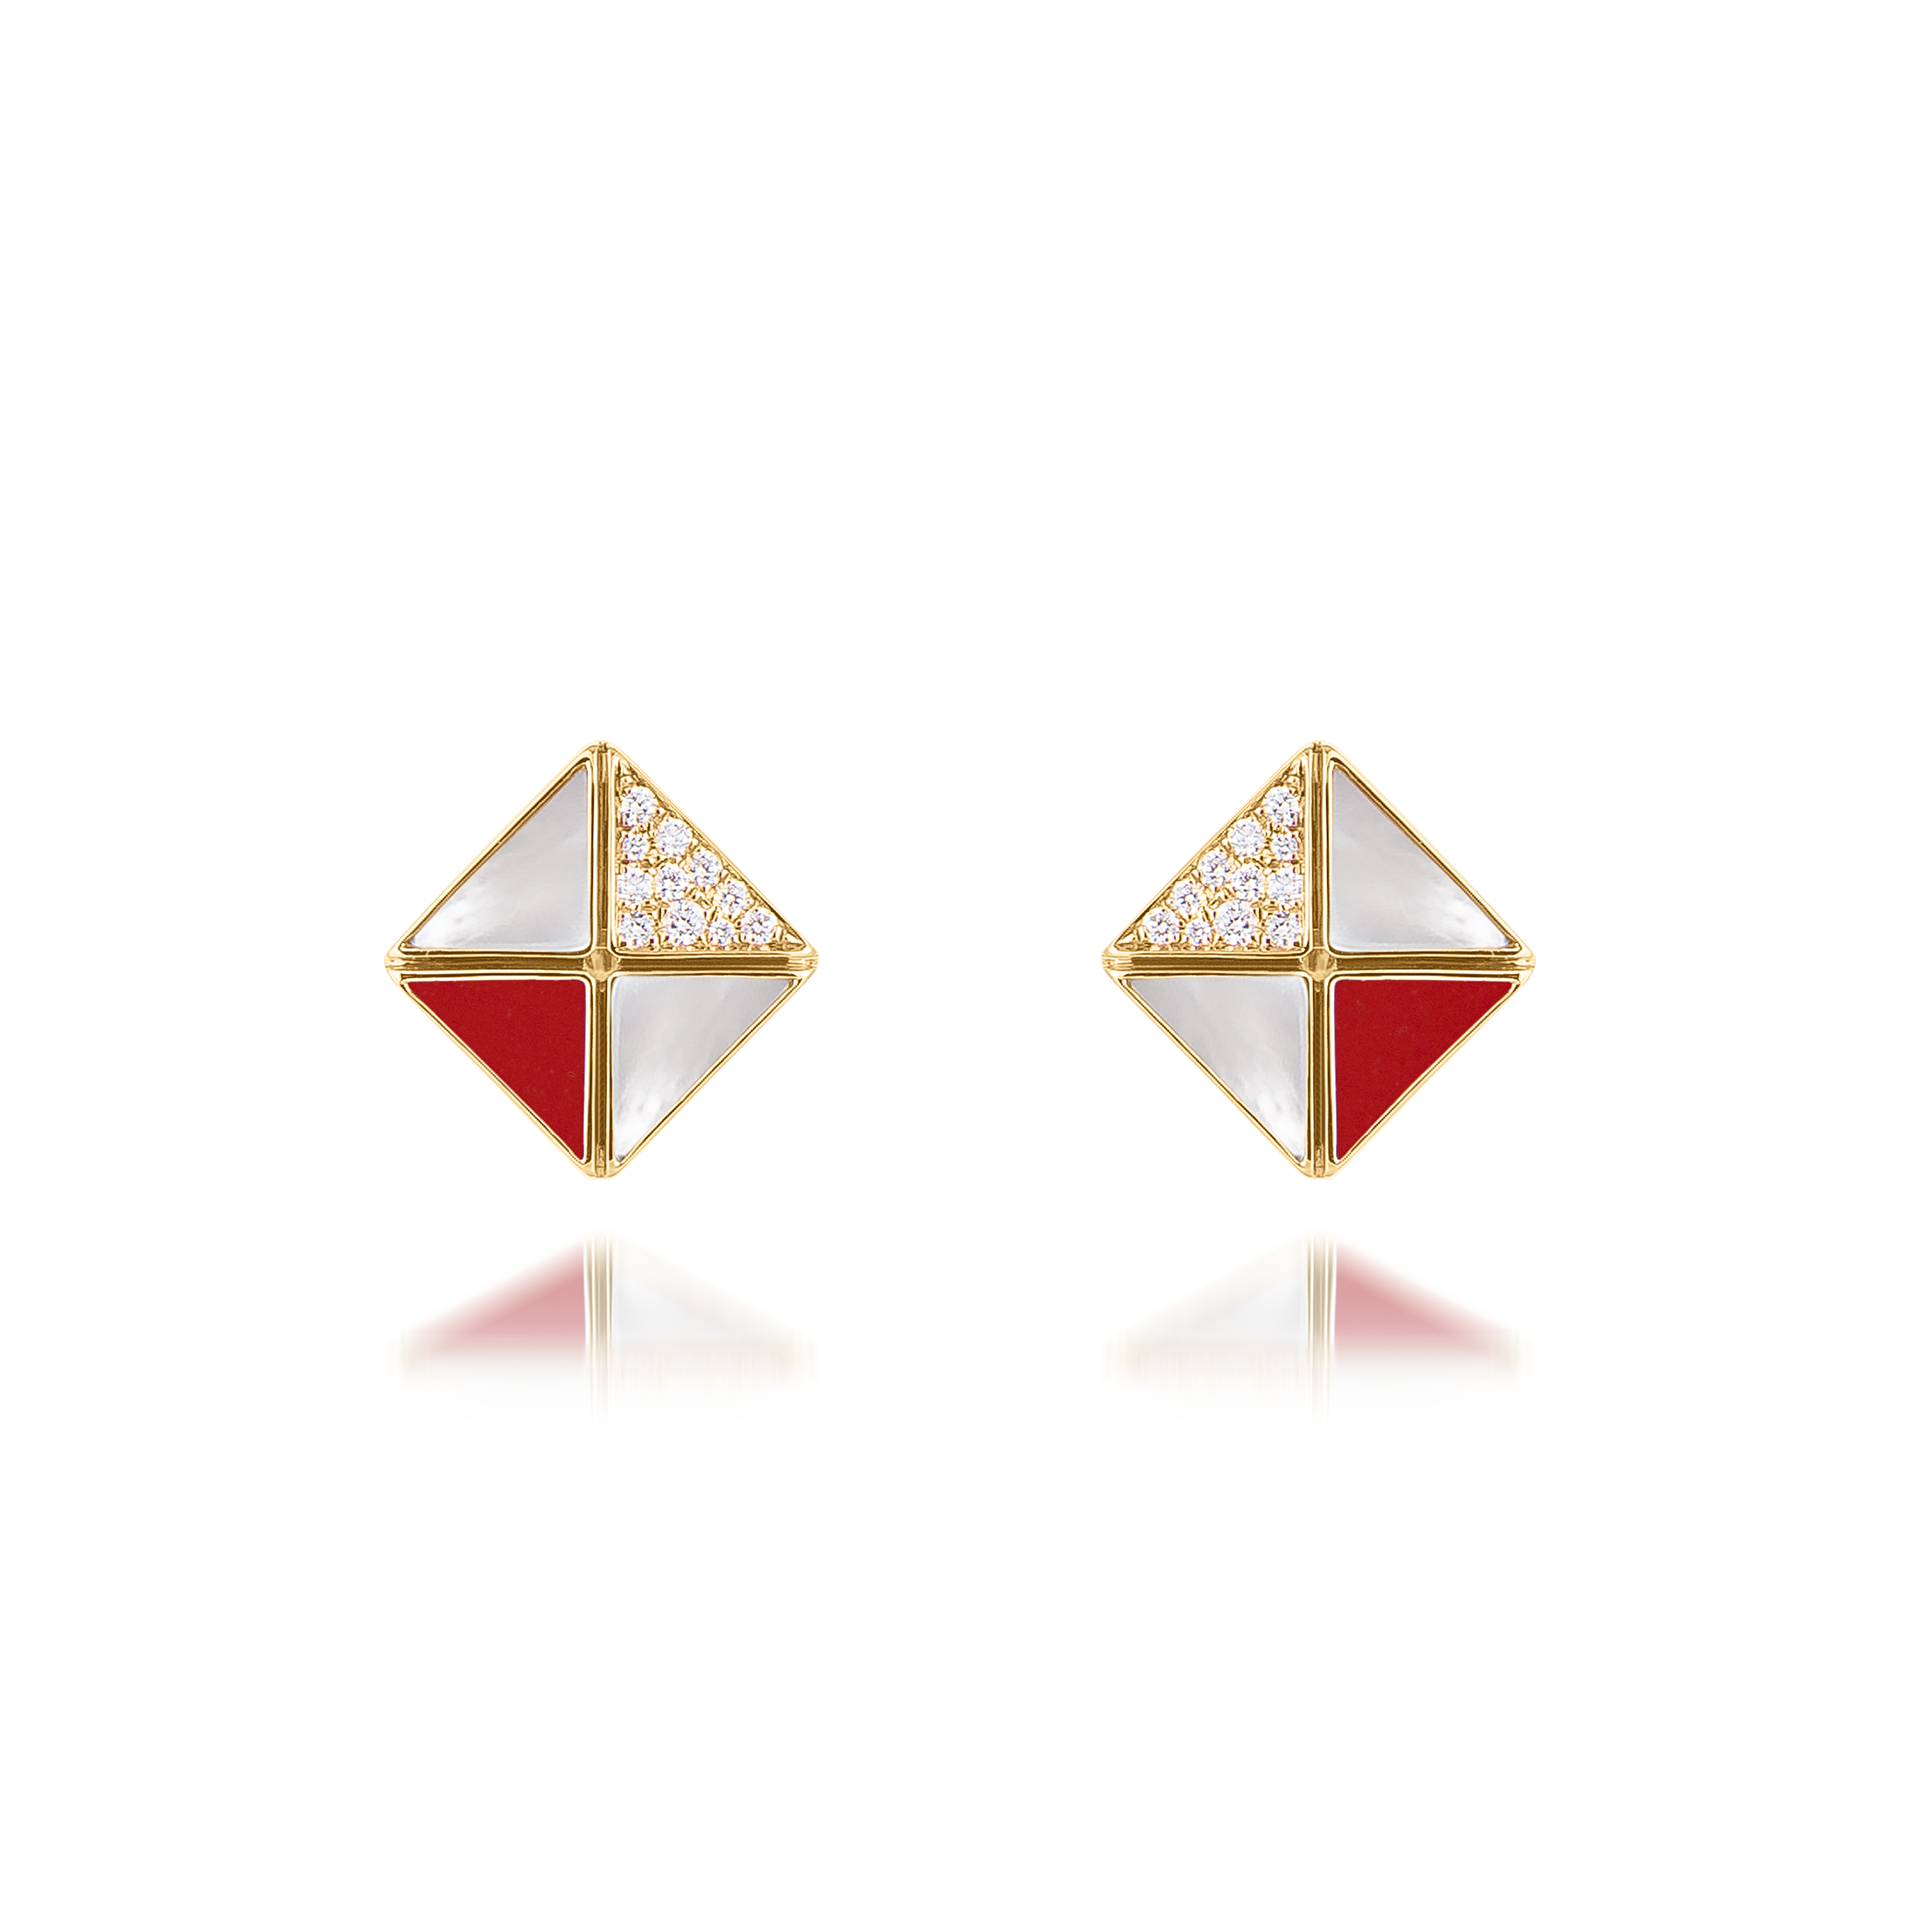 Deco Quadratic Studs with Red Coral, White Mother of Pearl and Diamonds  In 18K Yellow Gold